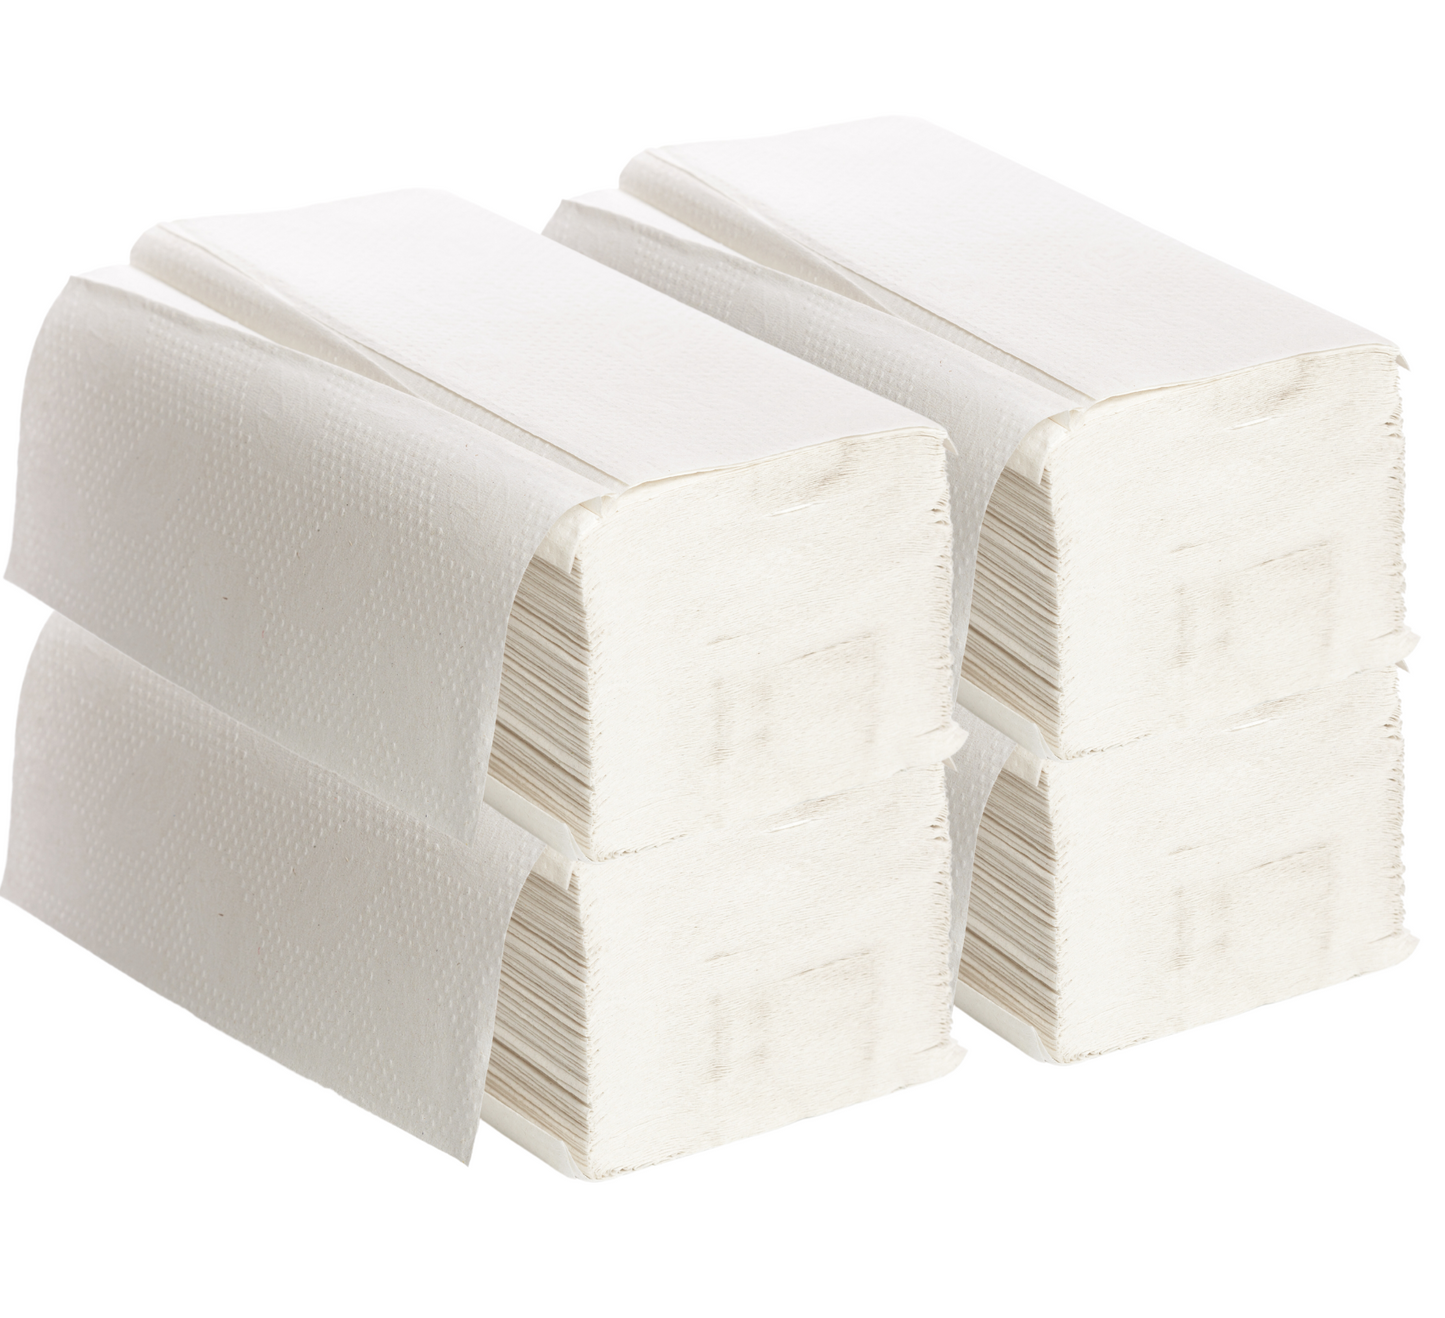 EJY IMPORT Multifold Paper Towels